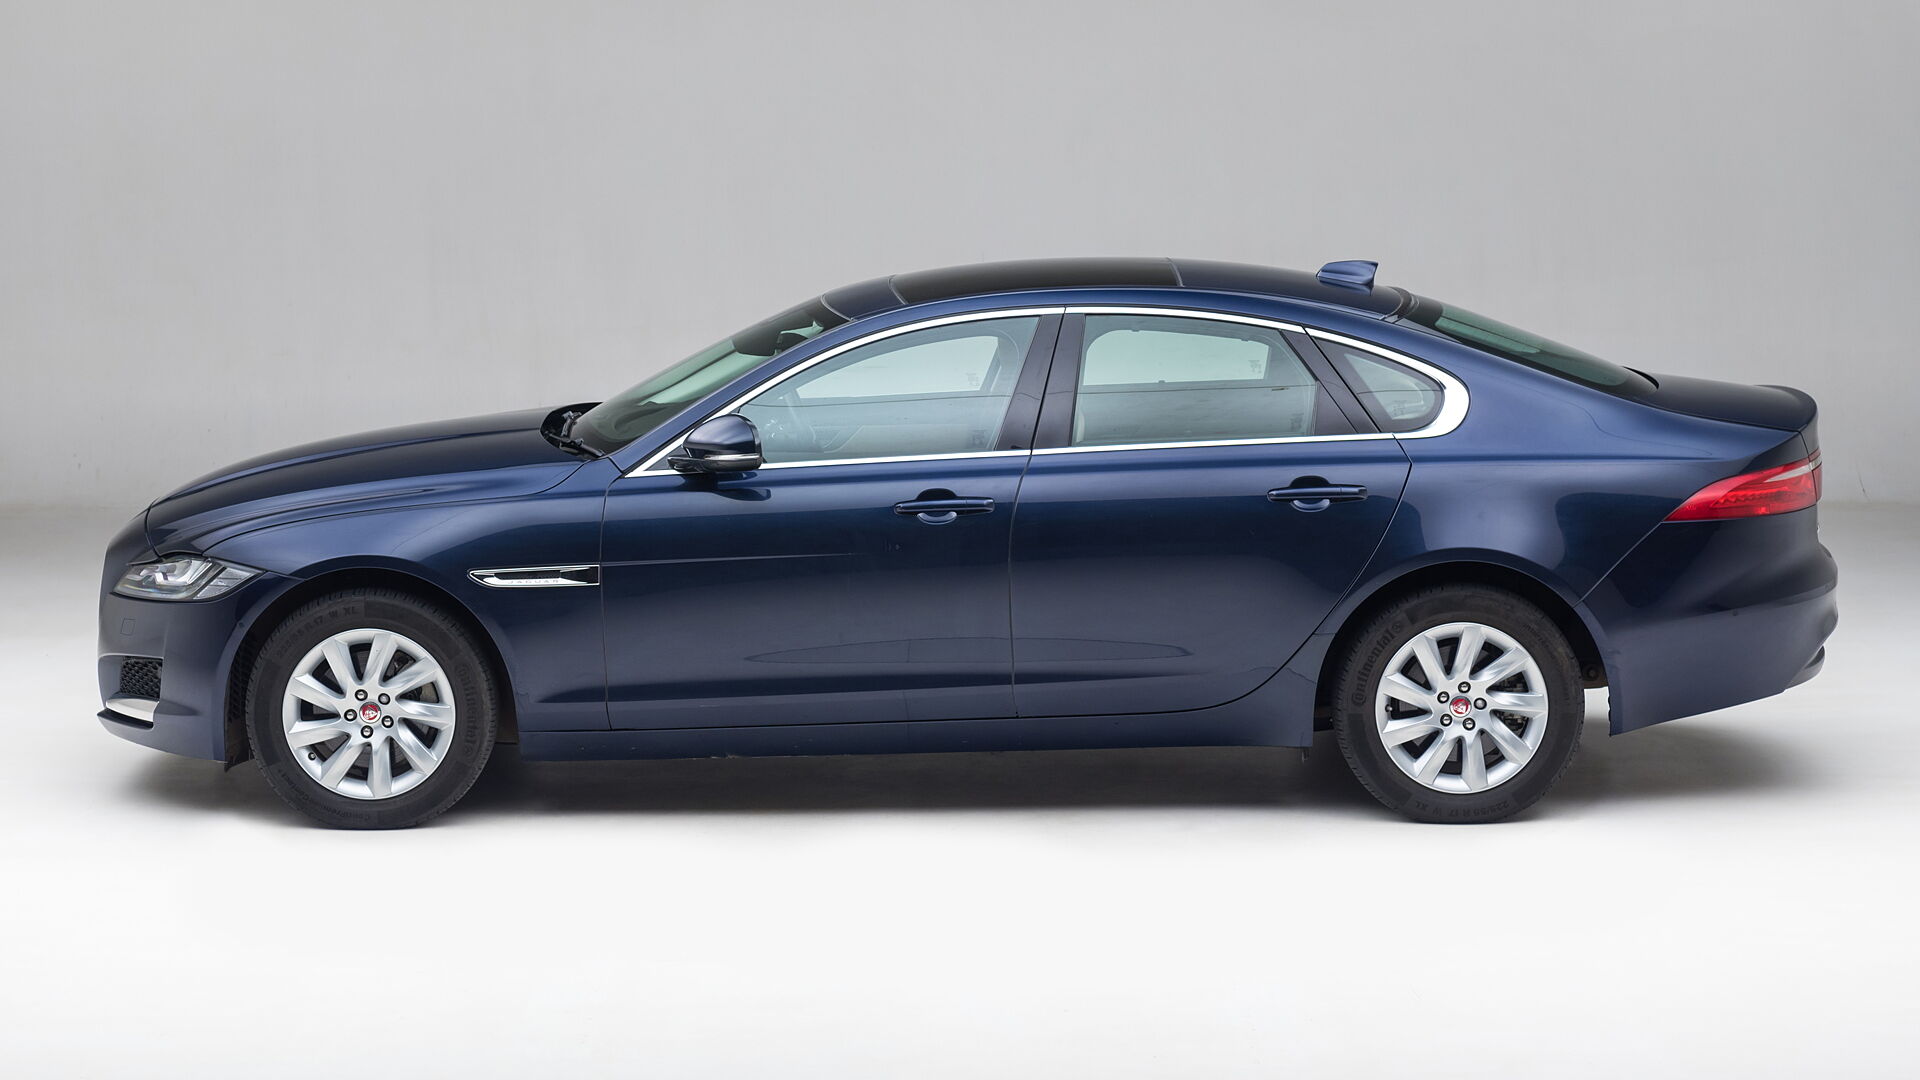 2021 Jaguar XF facelift launched in India, prices start from Rs 71.6 lakh -  Overdrive